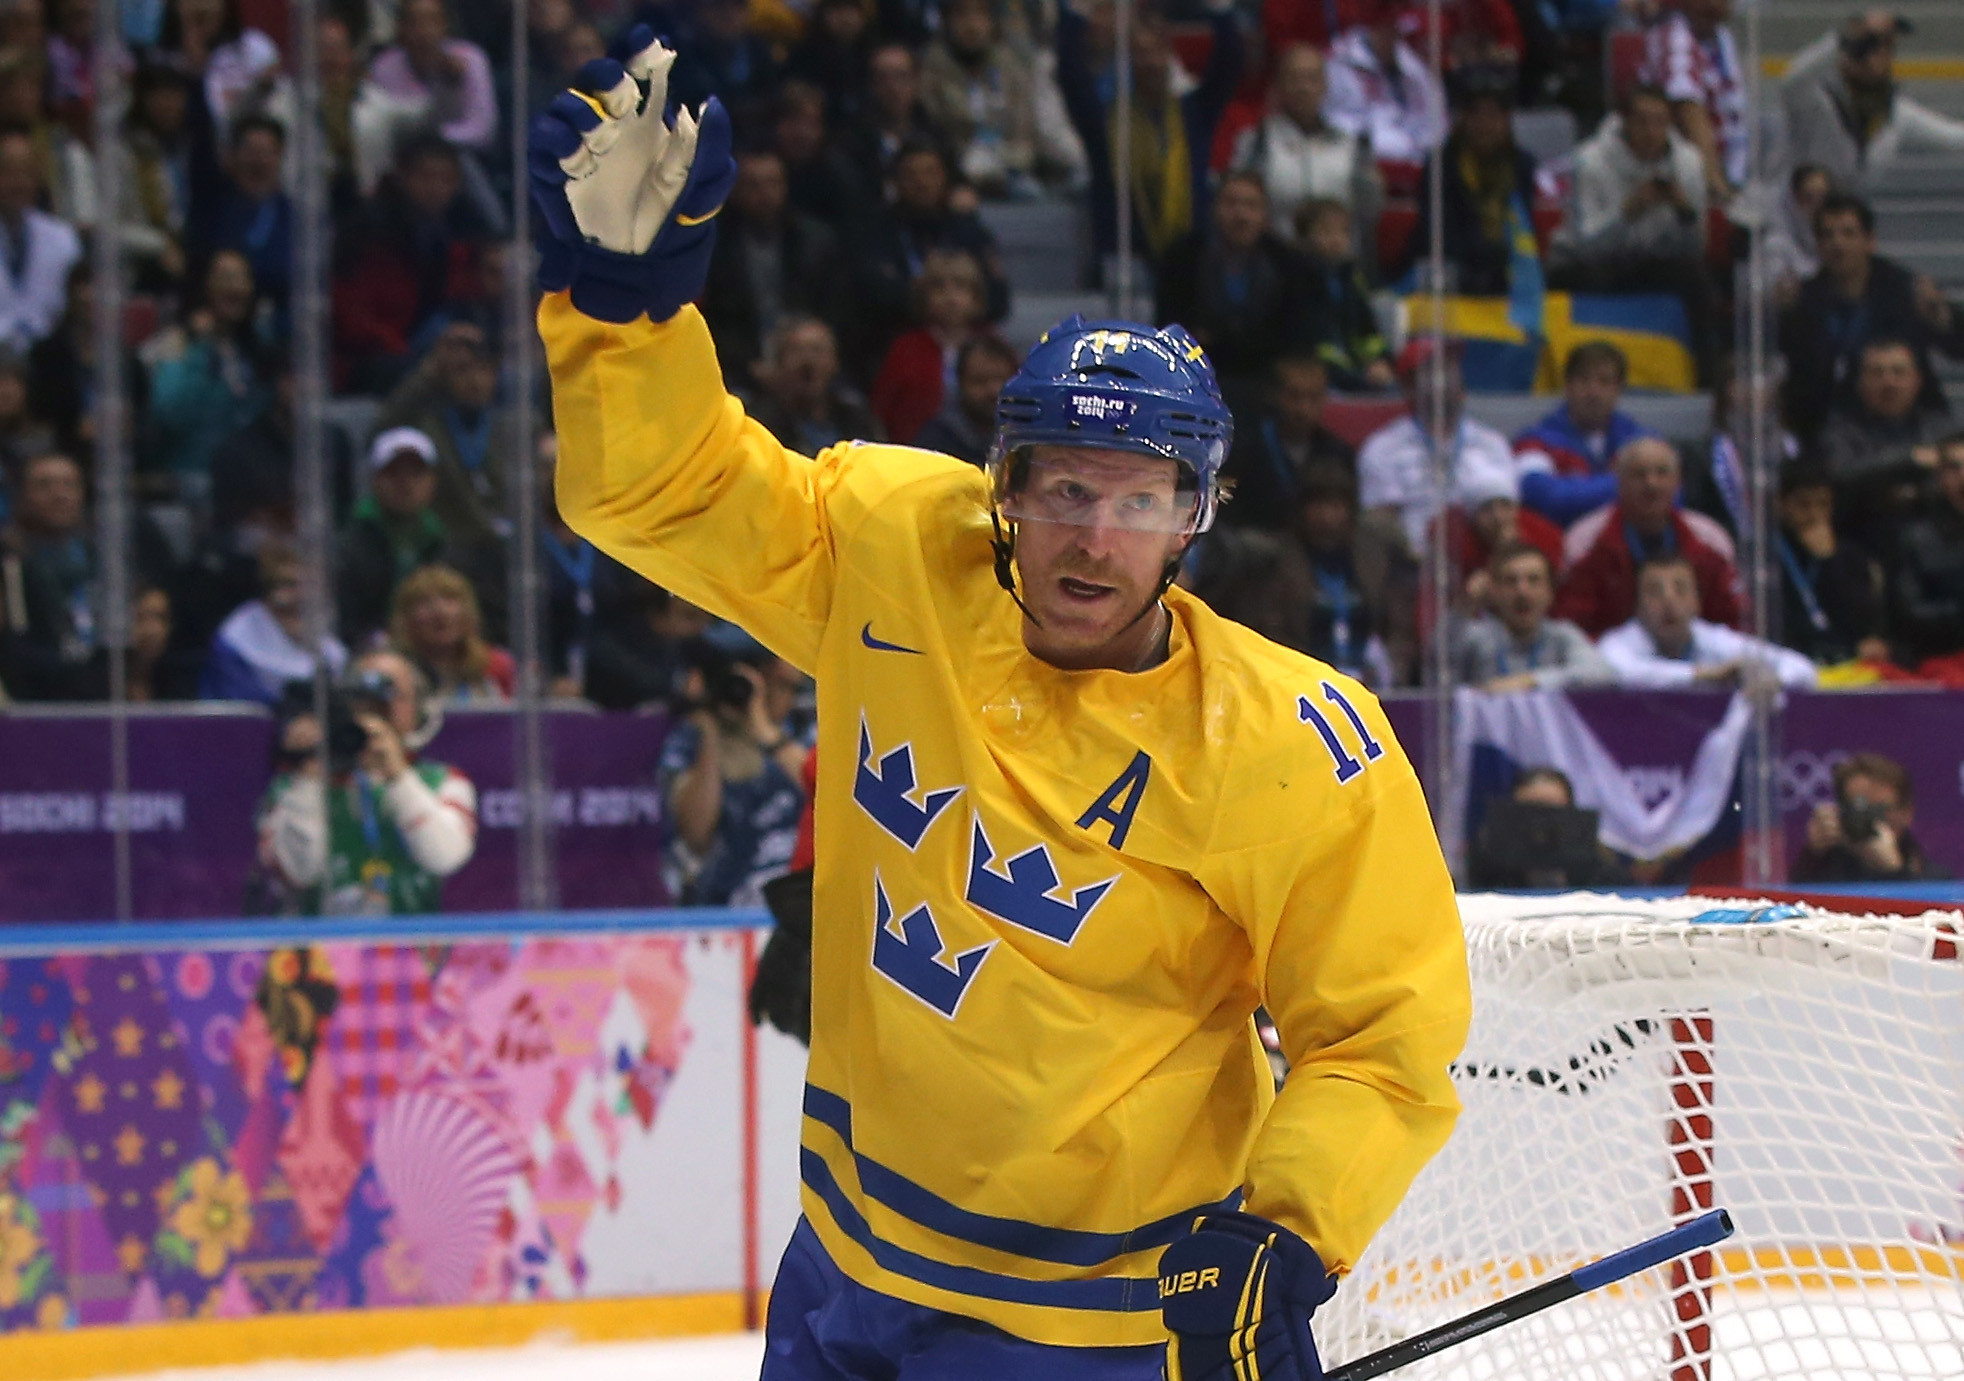 Daniel Alfredsson, of Sweden, is among the latest players to be inducted into the IIHF Hall of Fame ©Getty Images